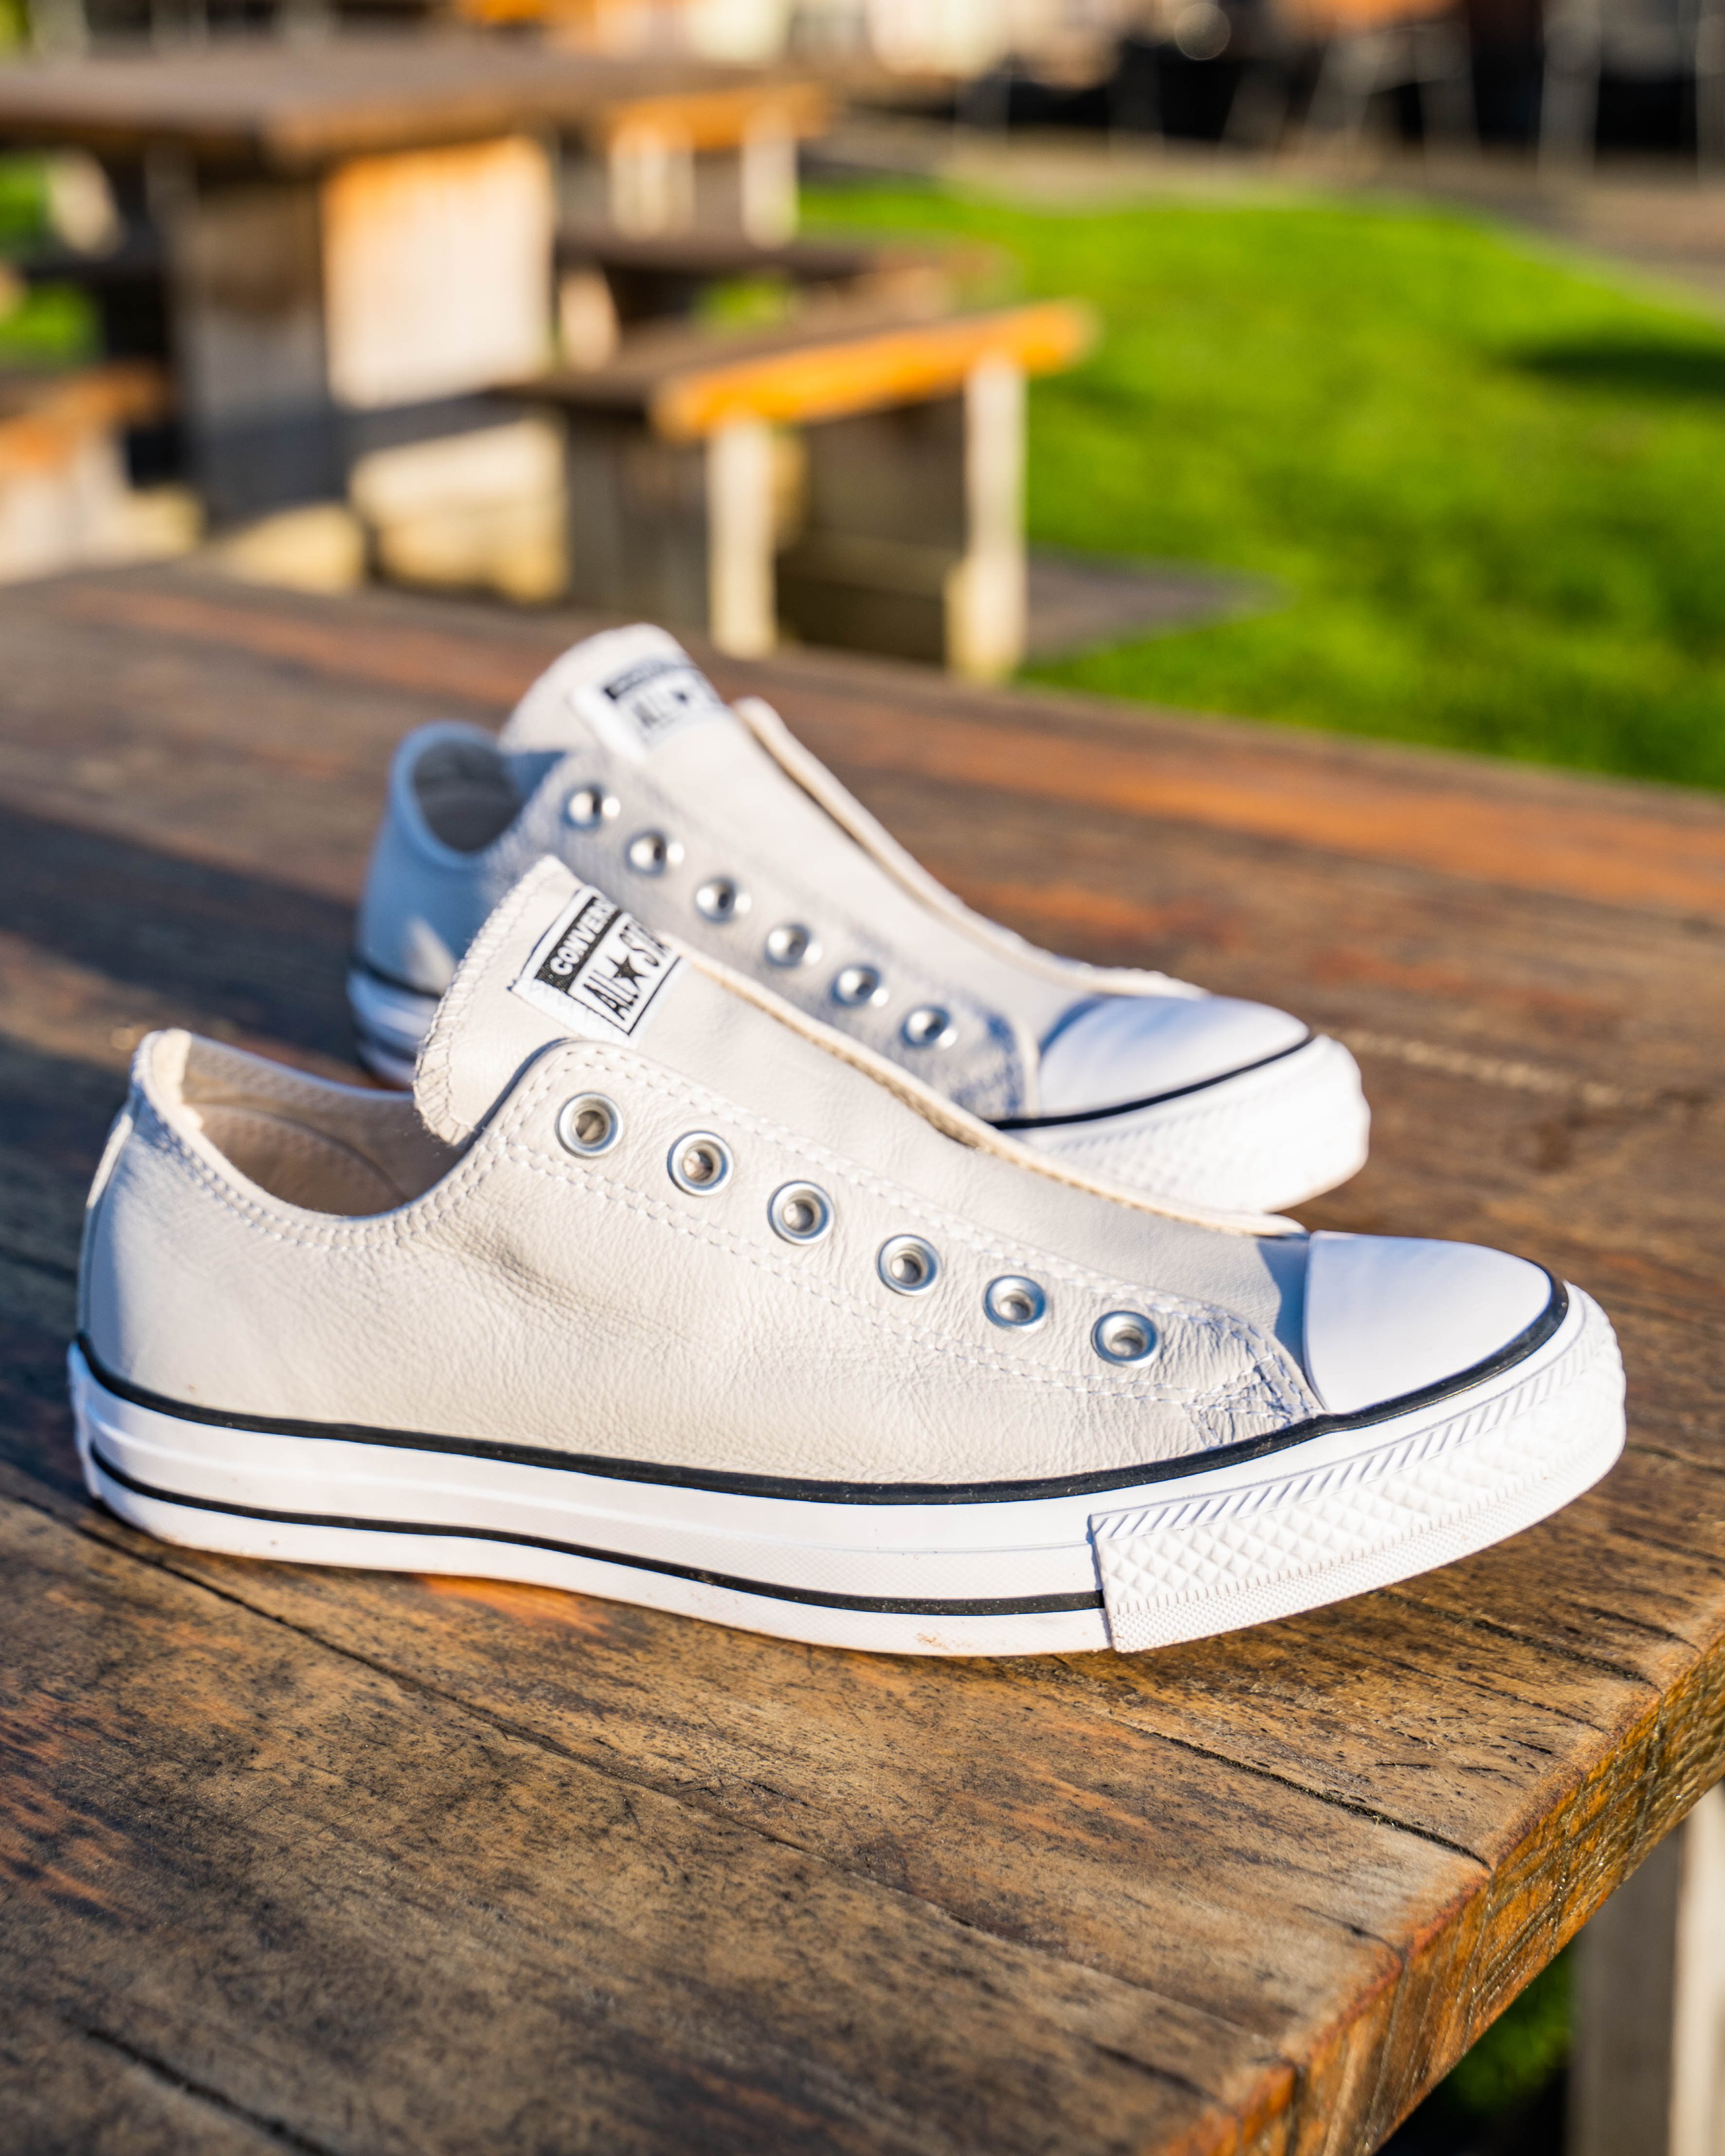 Listo para Decir a un lado Baggins Shoes on Twitter: "The #Converse Leather Mouse Grey Slip-Ons bring  a laidback, laceless look with just the right amount of edge. ⁠ ⁠ Shop  here: https://t.co/PN89UTFWuV 〰️⁠ ⁠ https://t.co/fOVo8GBmk3" / Twitter